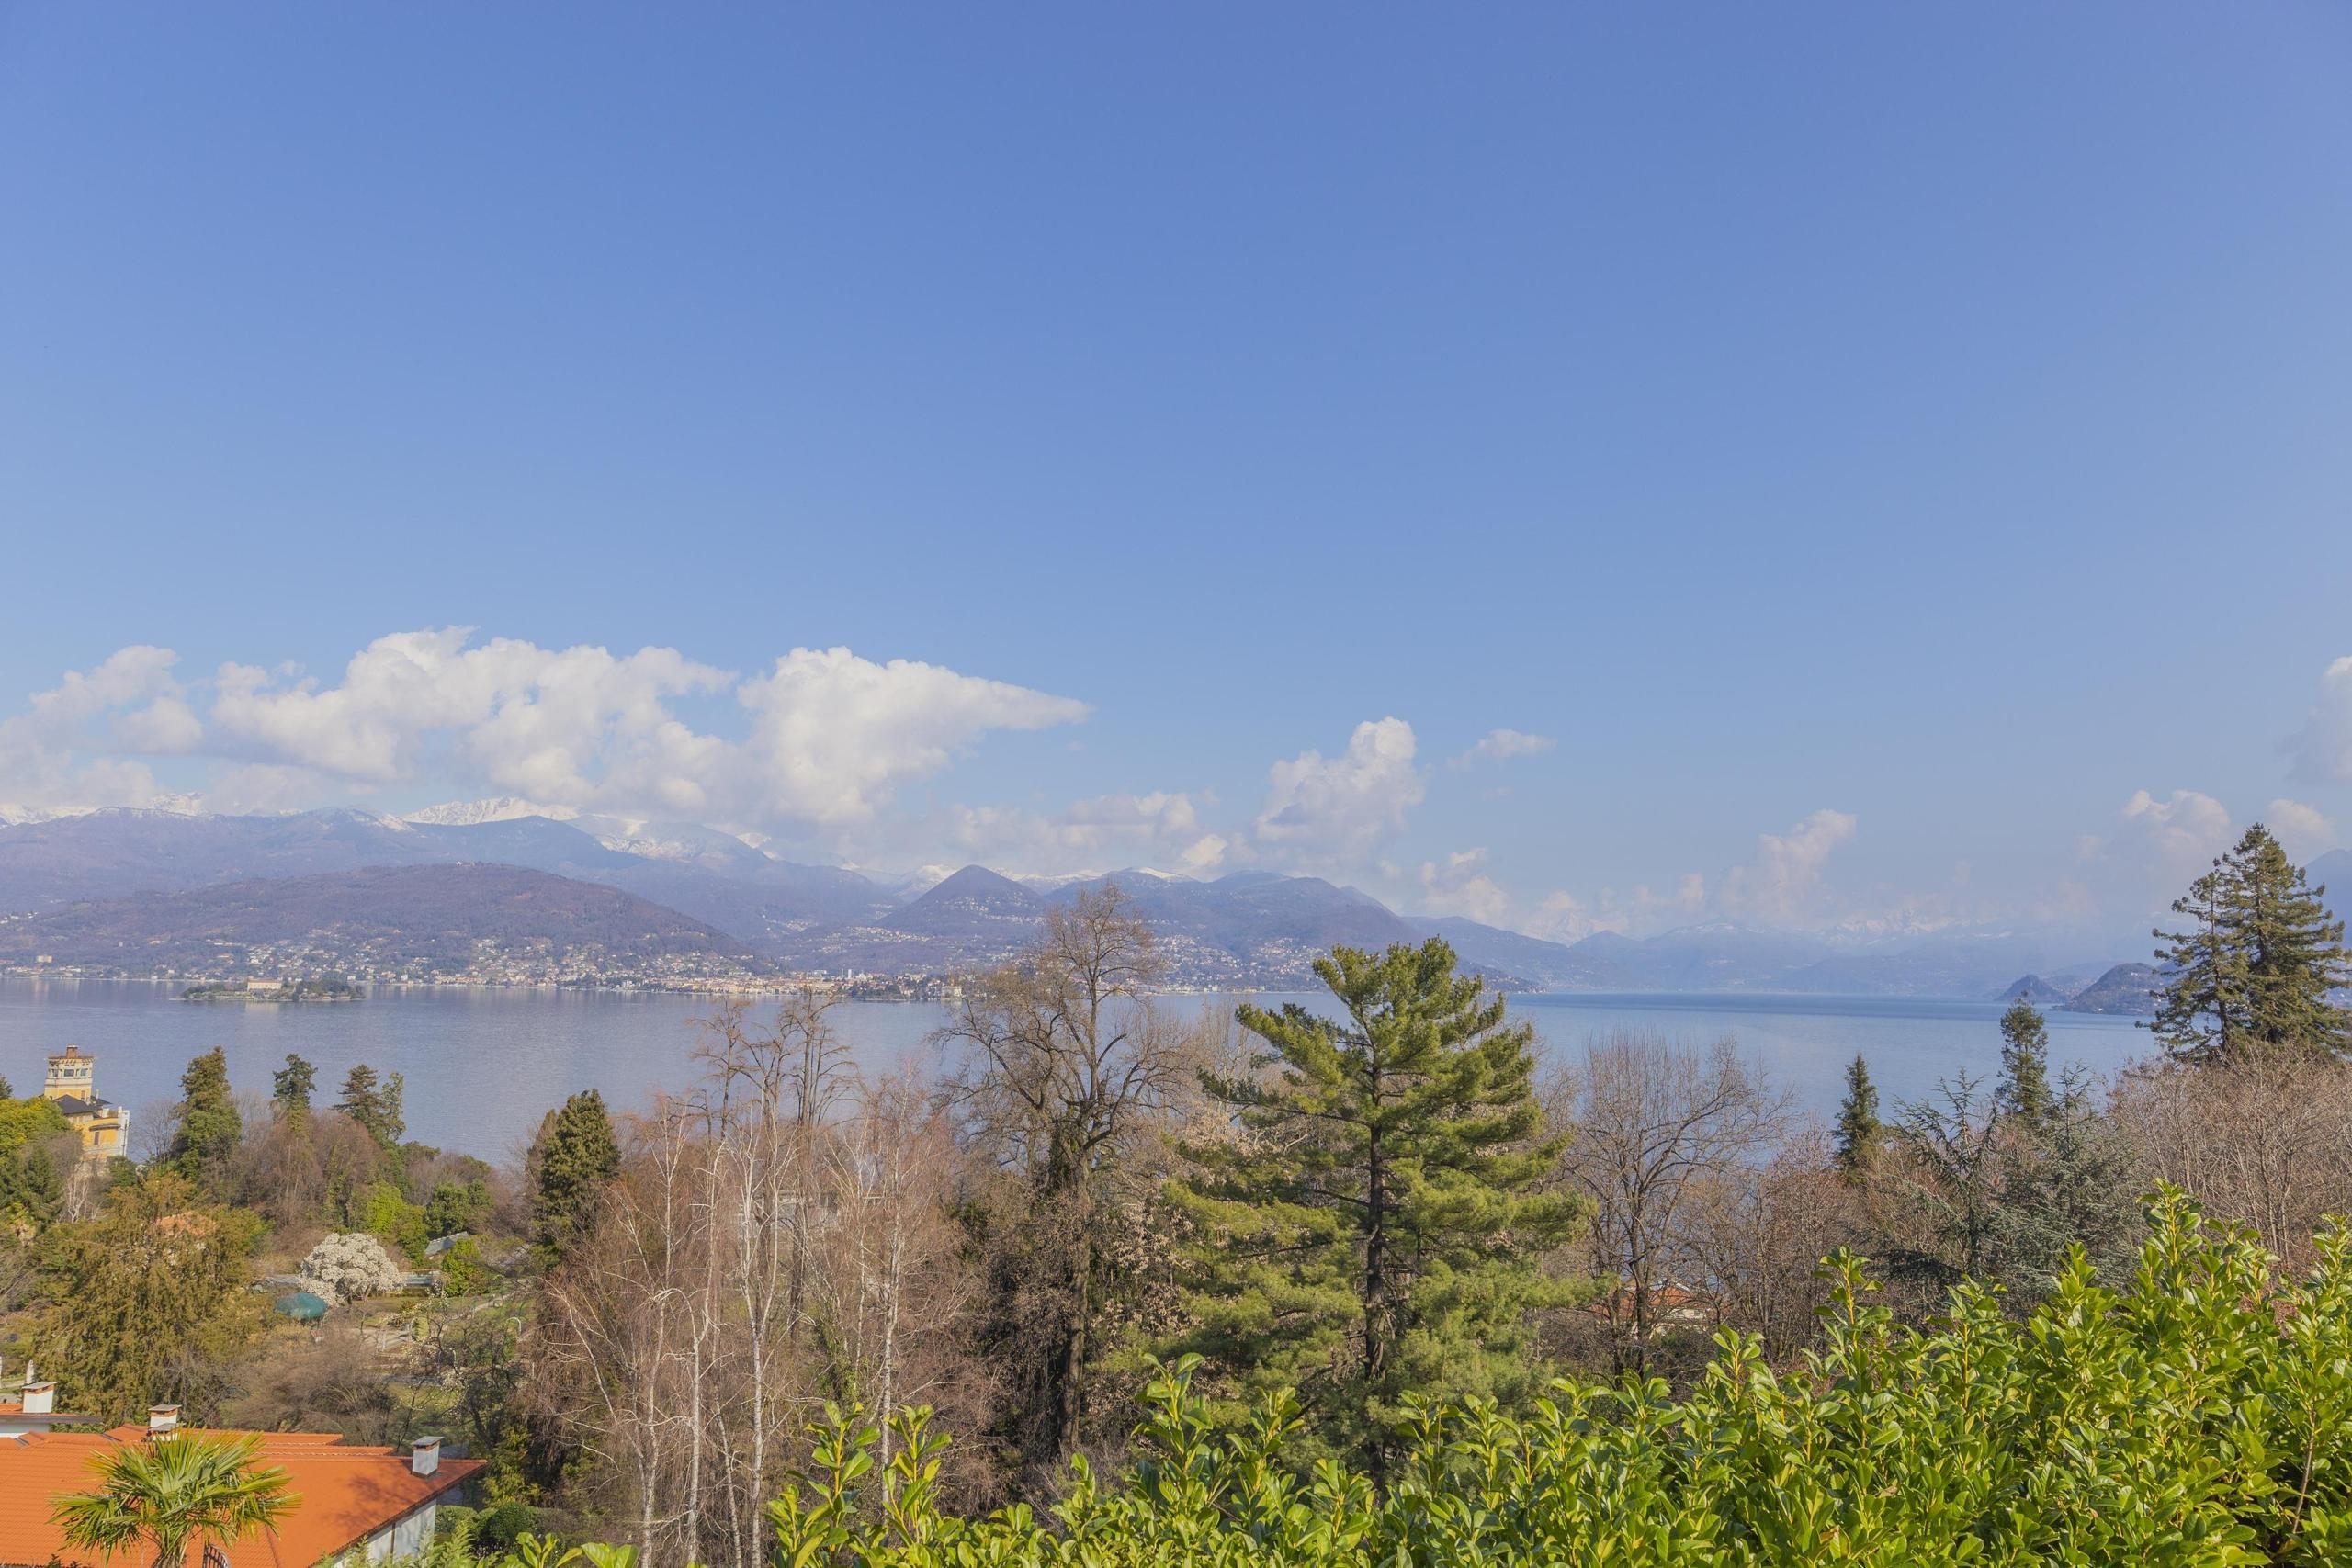 apartment-in-residence-riva-del-sole-stresa-lakeview-holiday-rentals